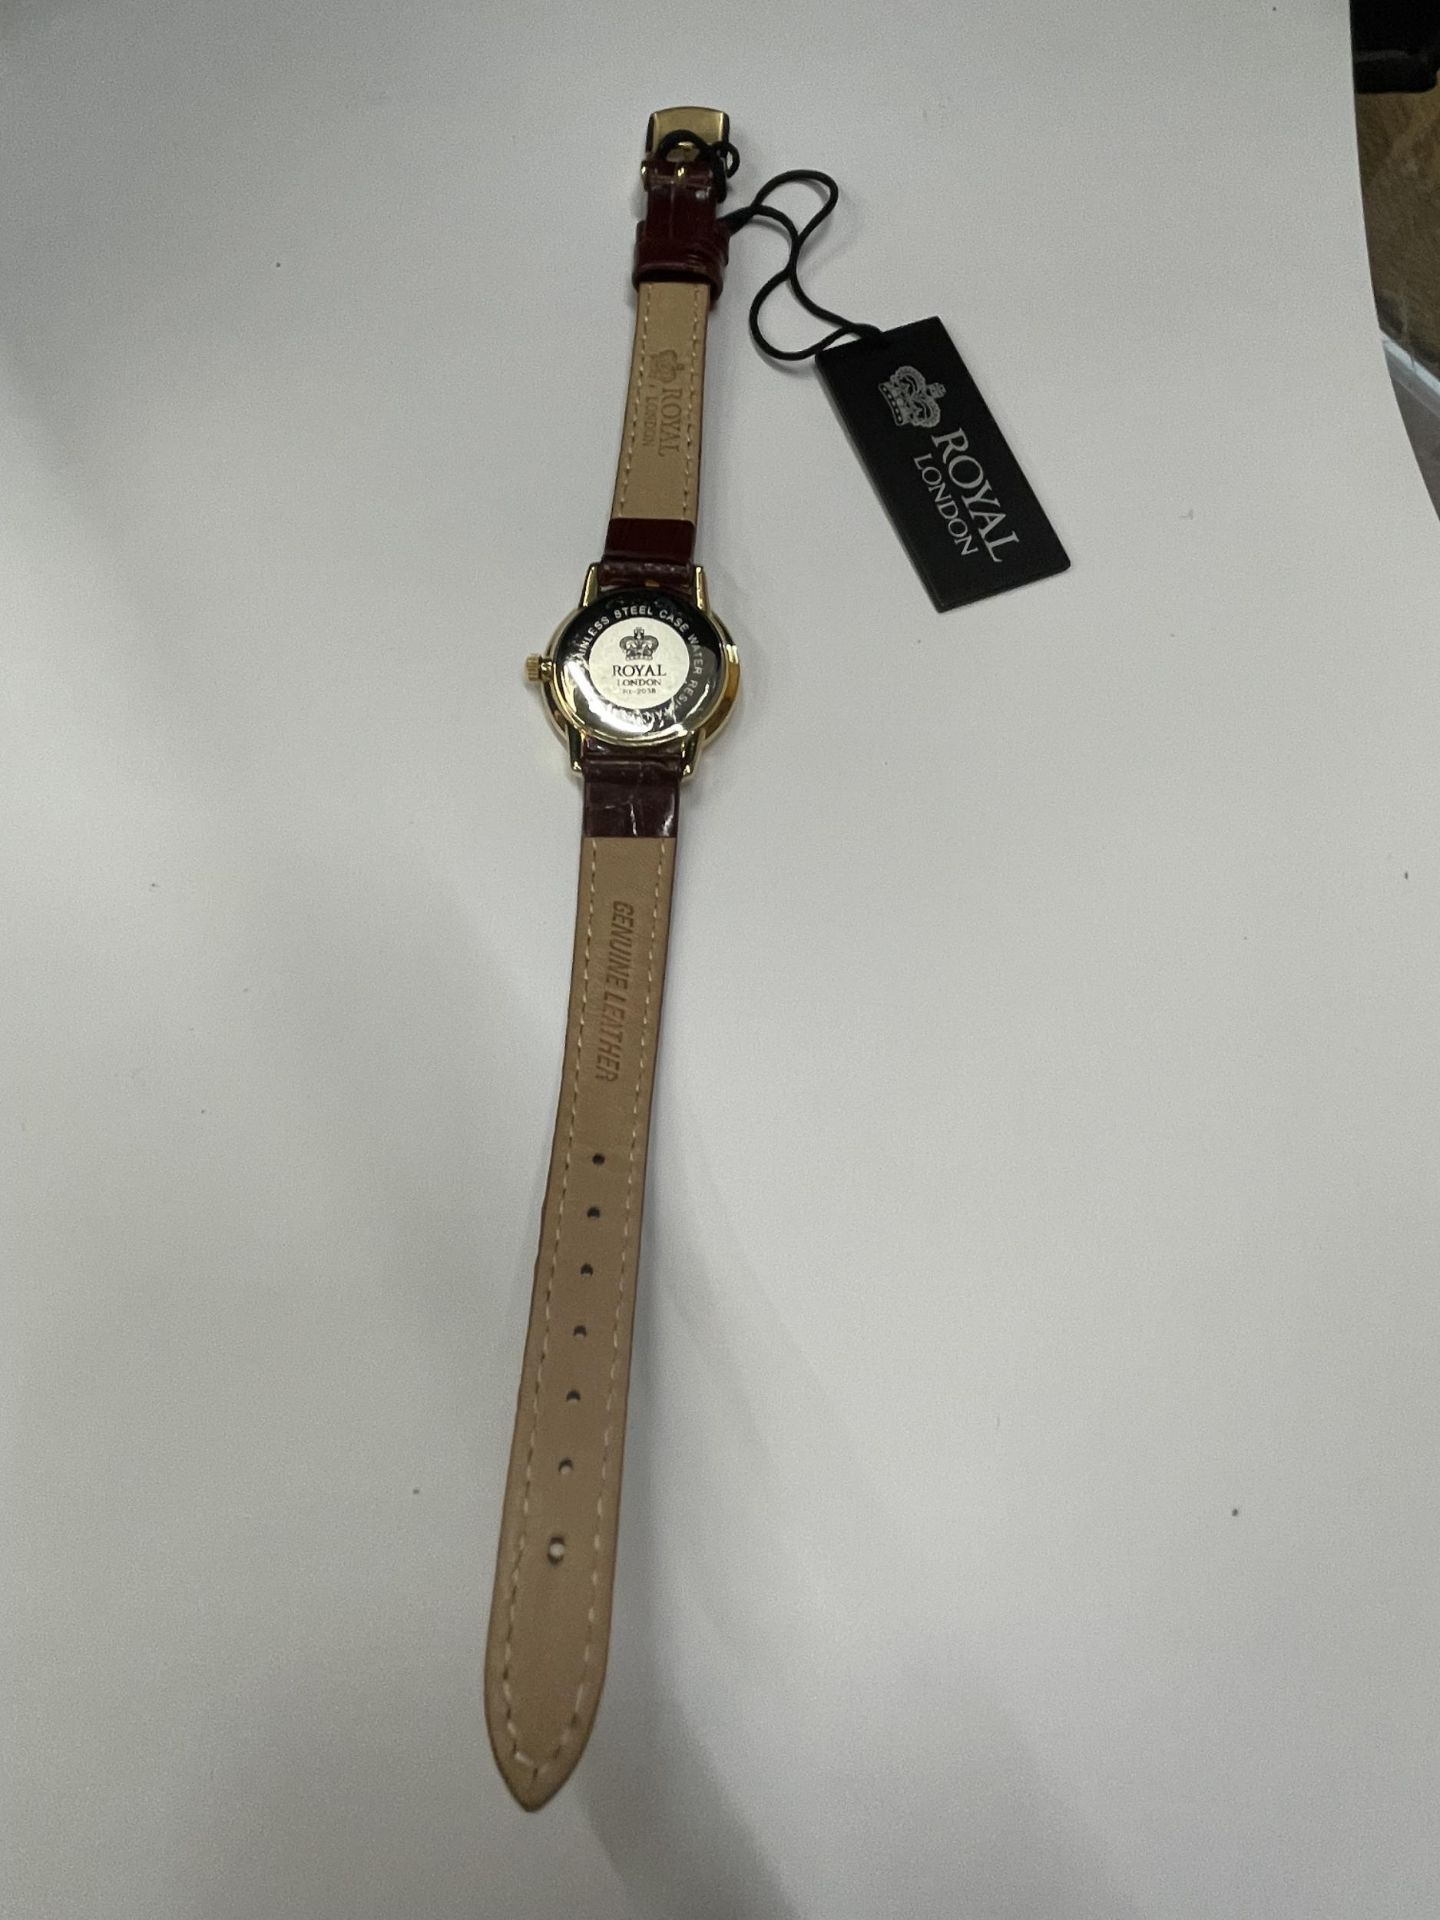 A ROYAL LONDON WRIST WATCH SEEN WORKING BUT NO WARRANTY - Image 2 of 2